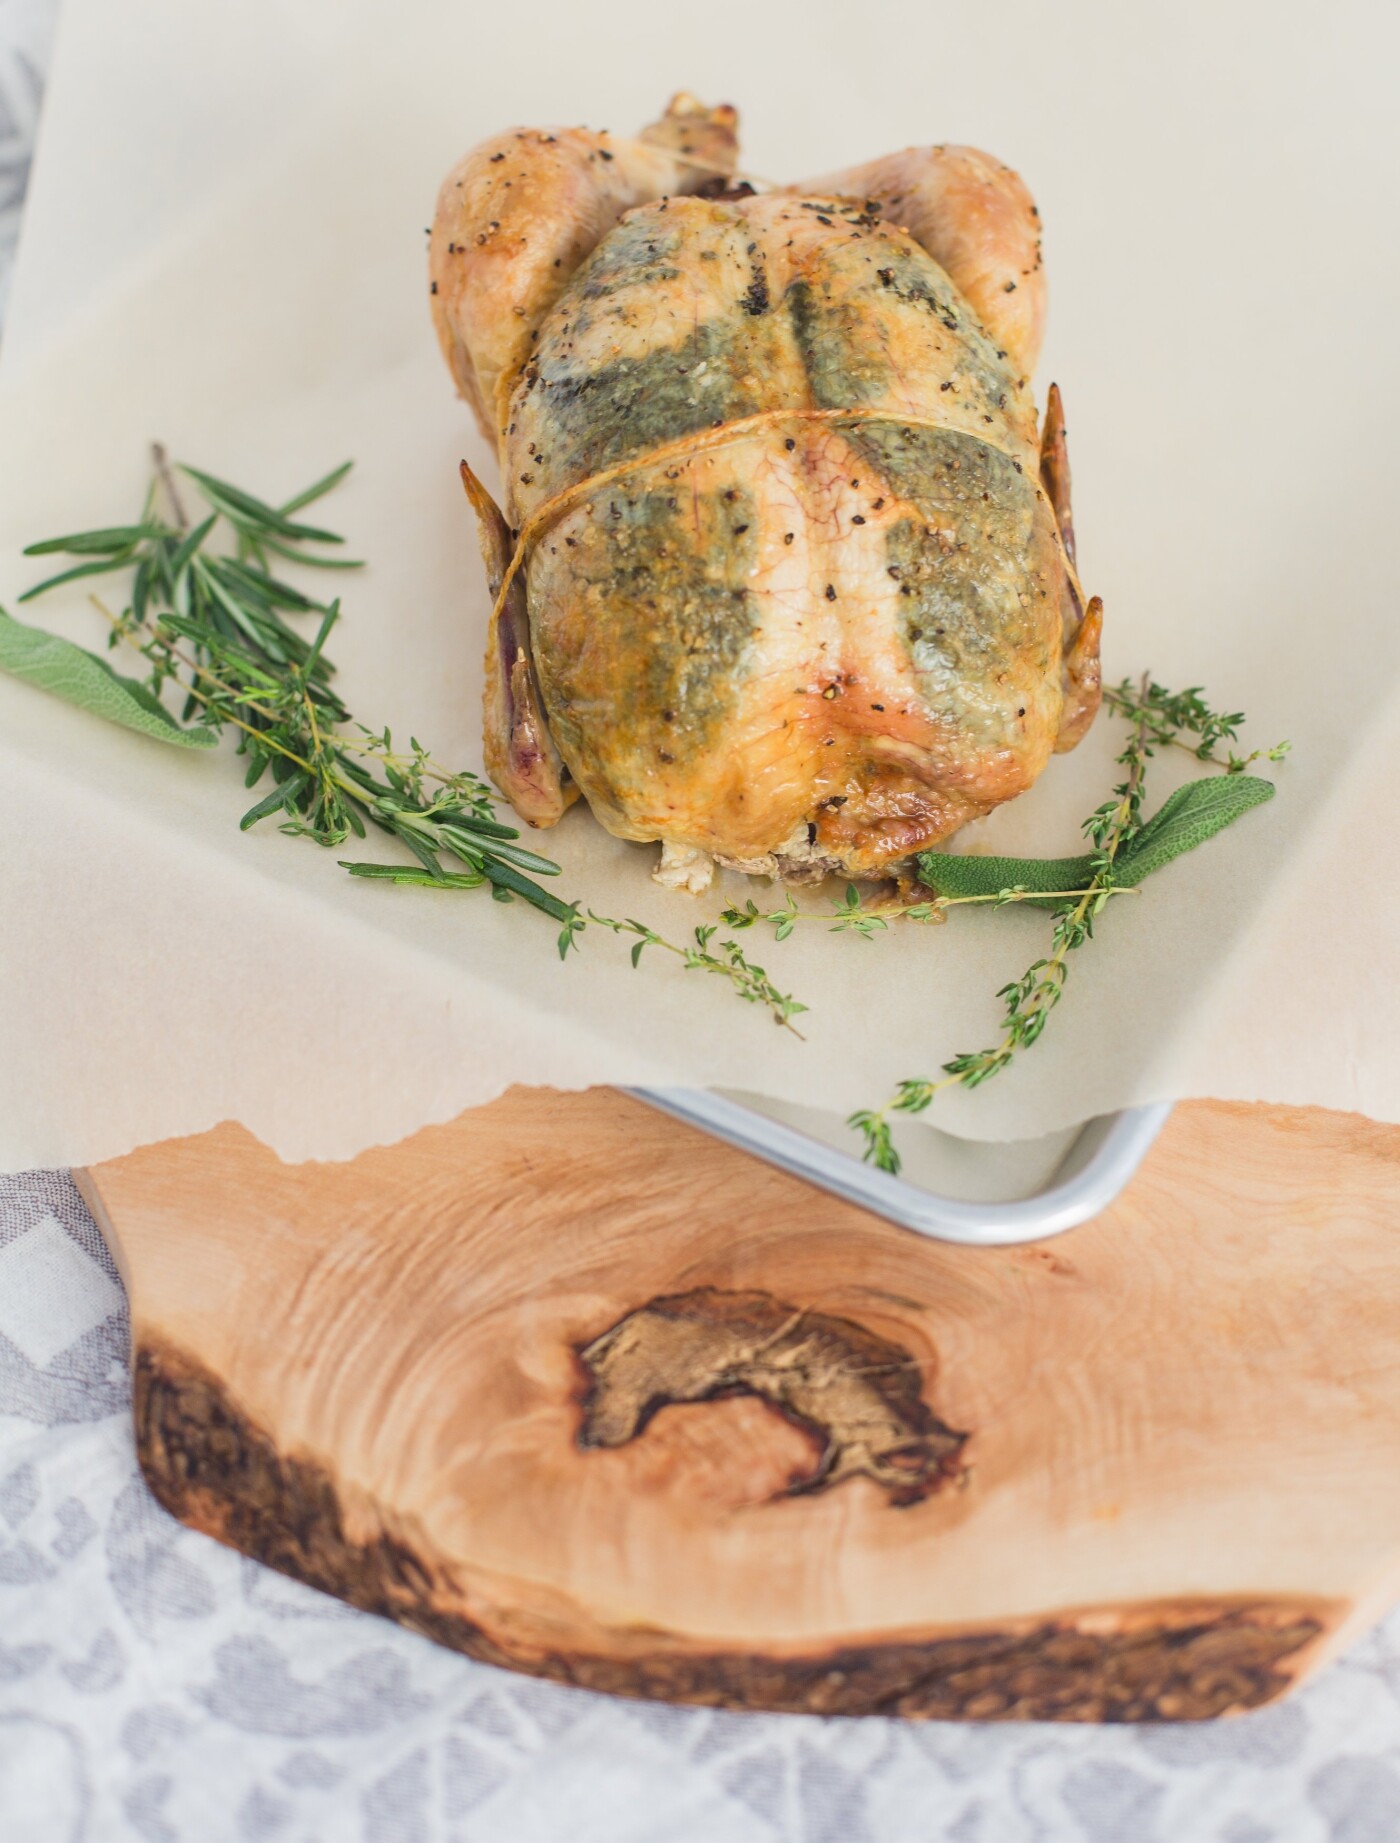 This Herb butter roasted Chicken was made by my husband, Chef Cody Lindsay of The Wellness Soldier, for The Canadian Family Military magazine. It is part of a series of recipes where we educate our Canadian Military and Veteran community how to eat real, clean, wholesome foods.